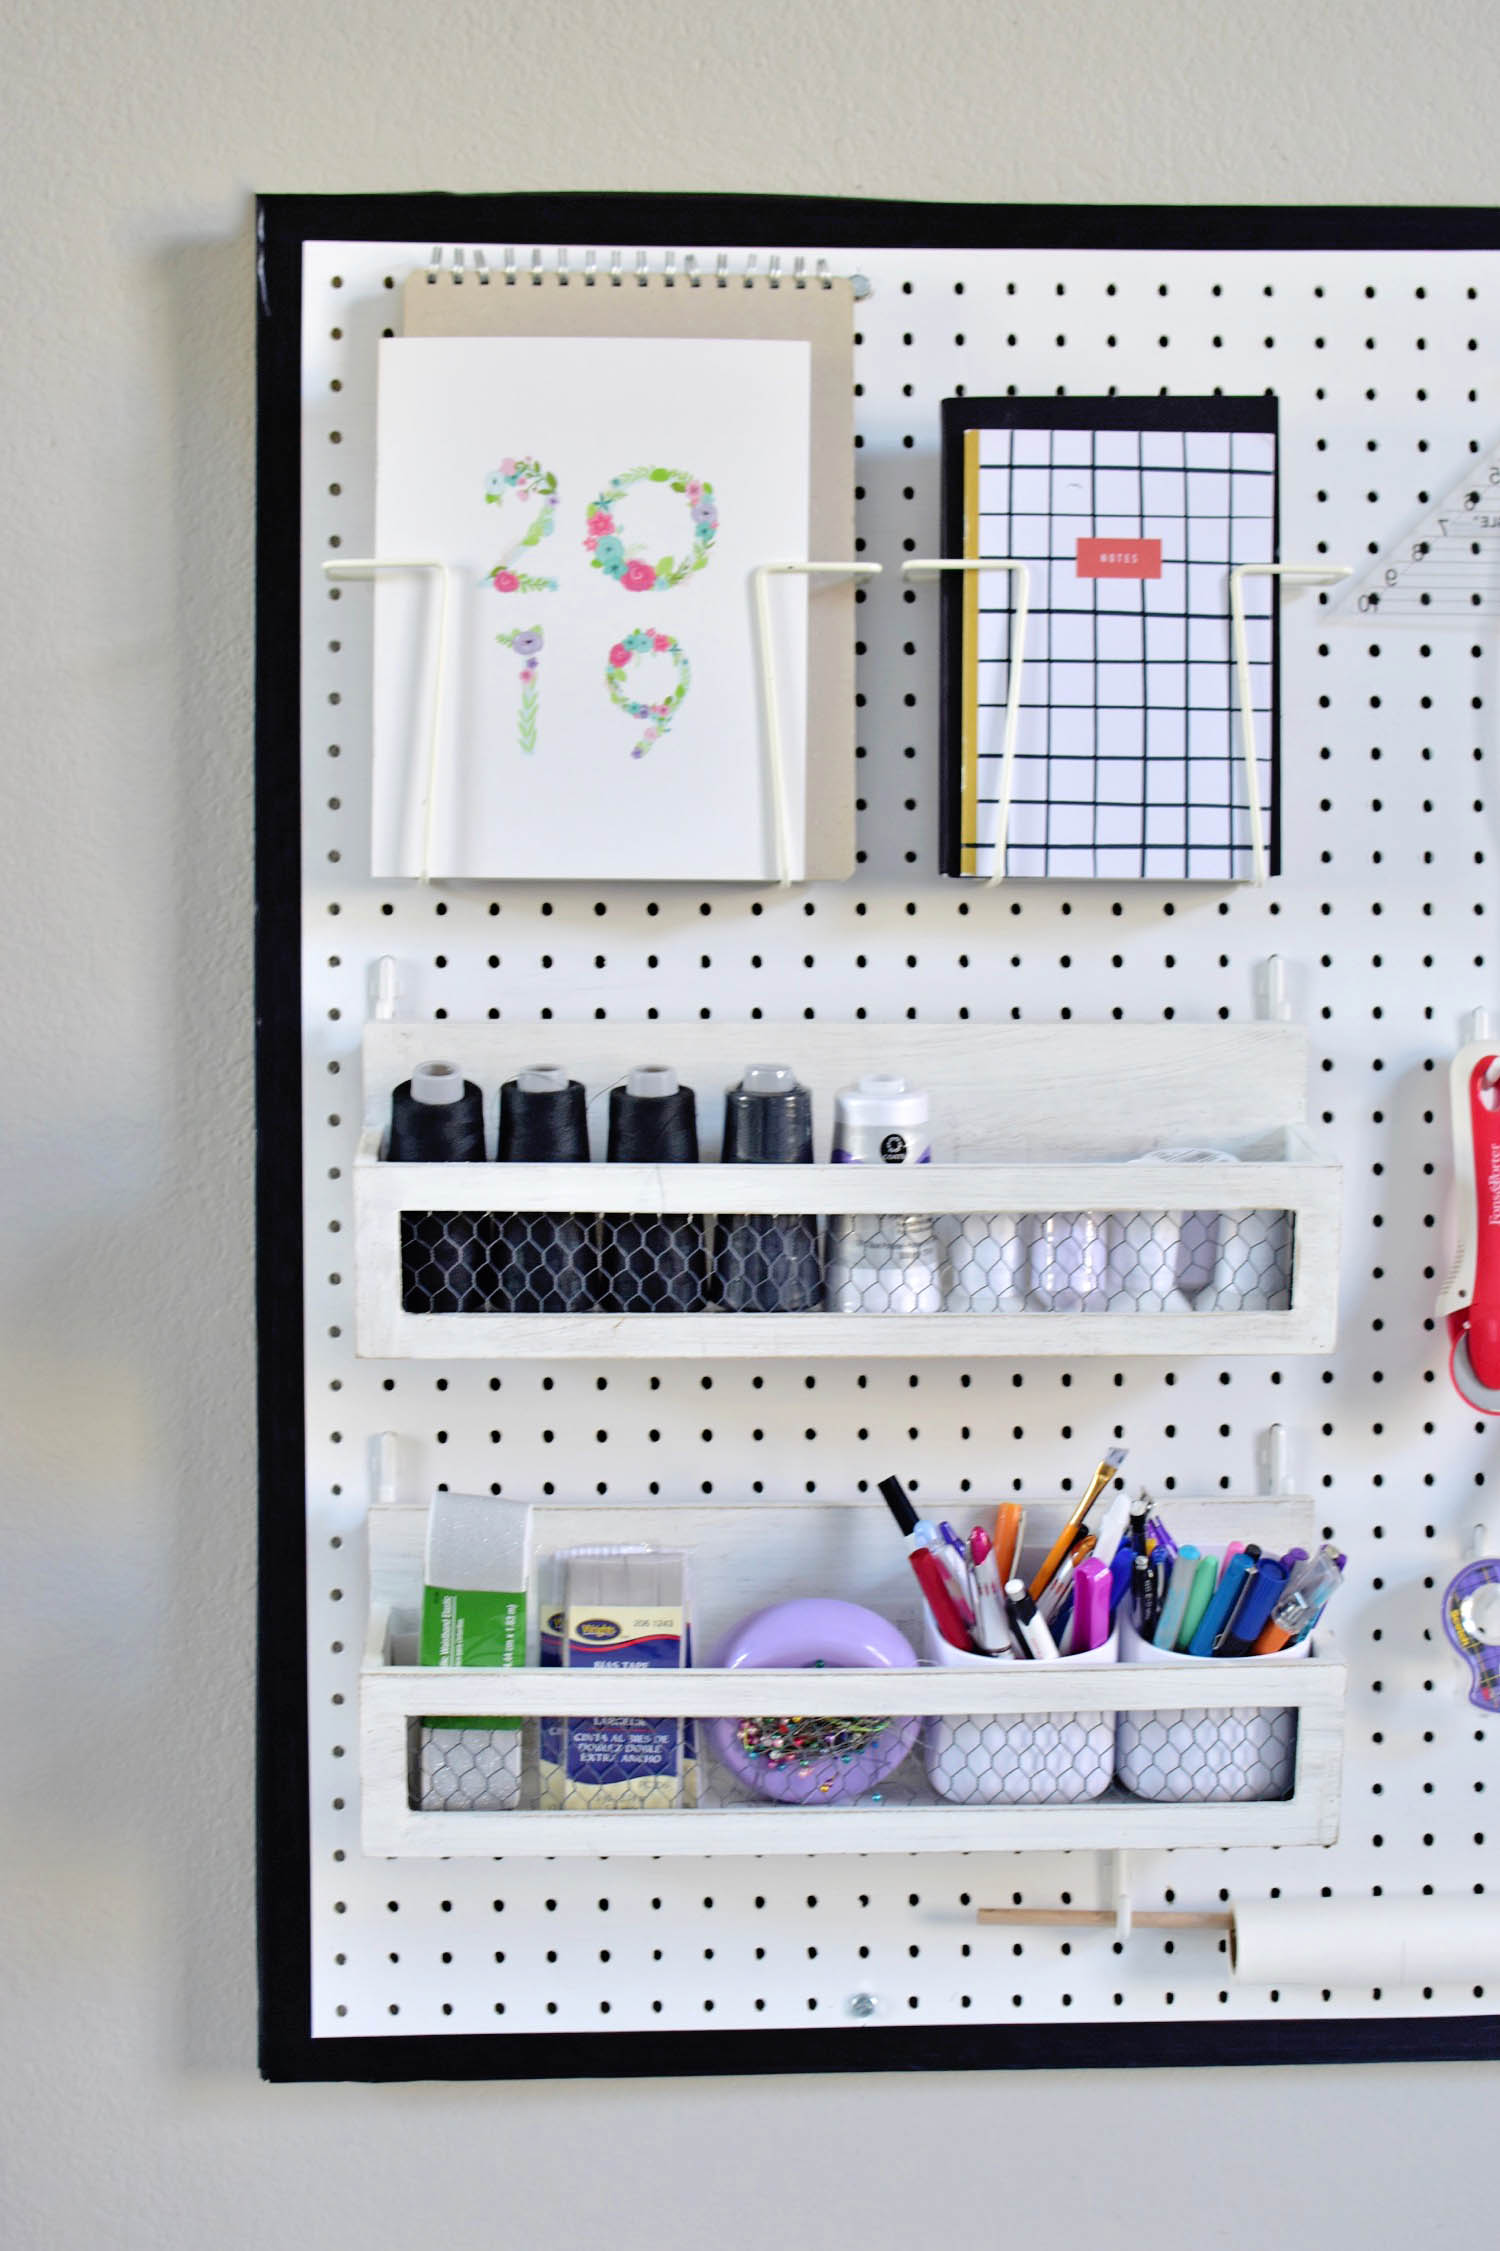 Sewing Room Storage ideas and pegboard organization ideas